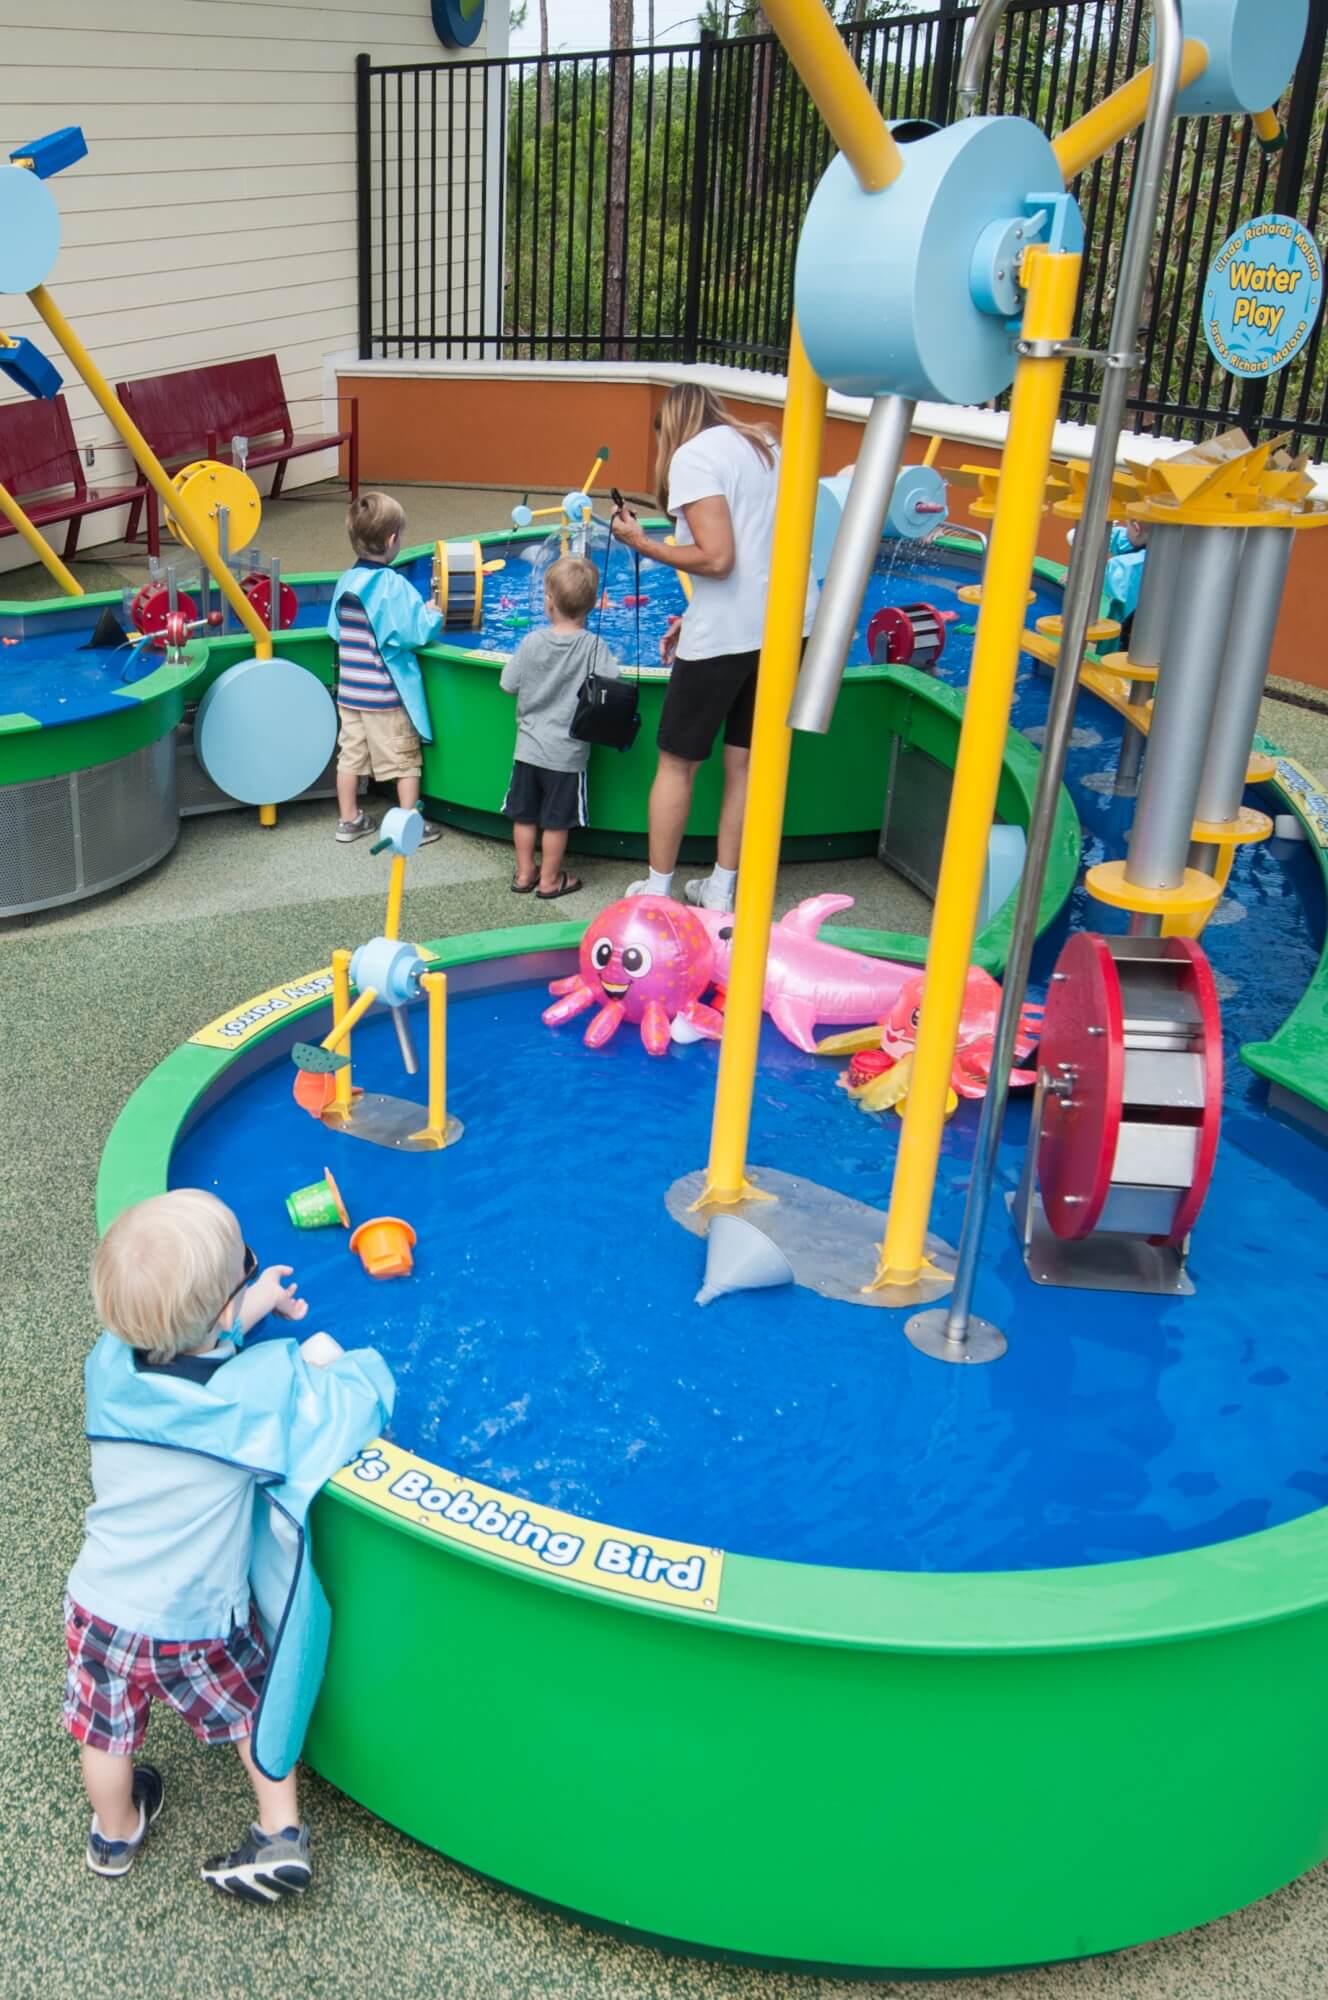 Must Do Family Fun water play area at Golisano Children's Museum of Naples Naples, Florida | MustDo.com Must Do Visitor Guides